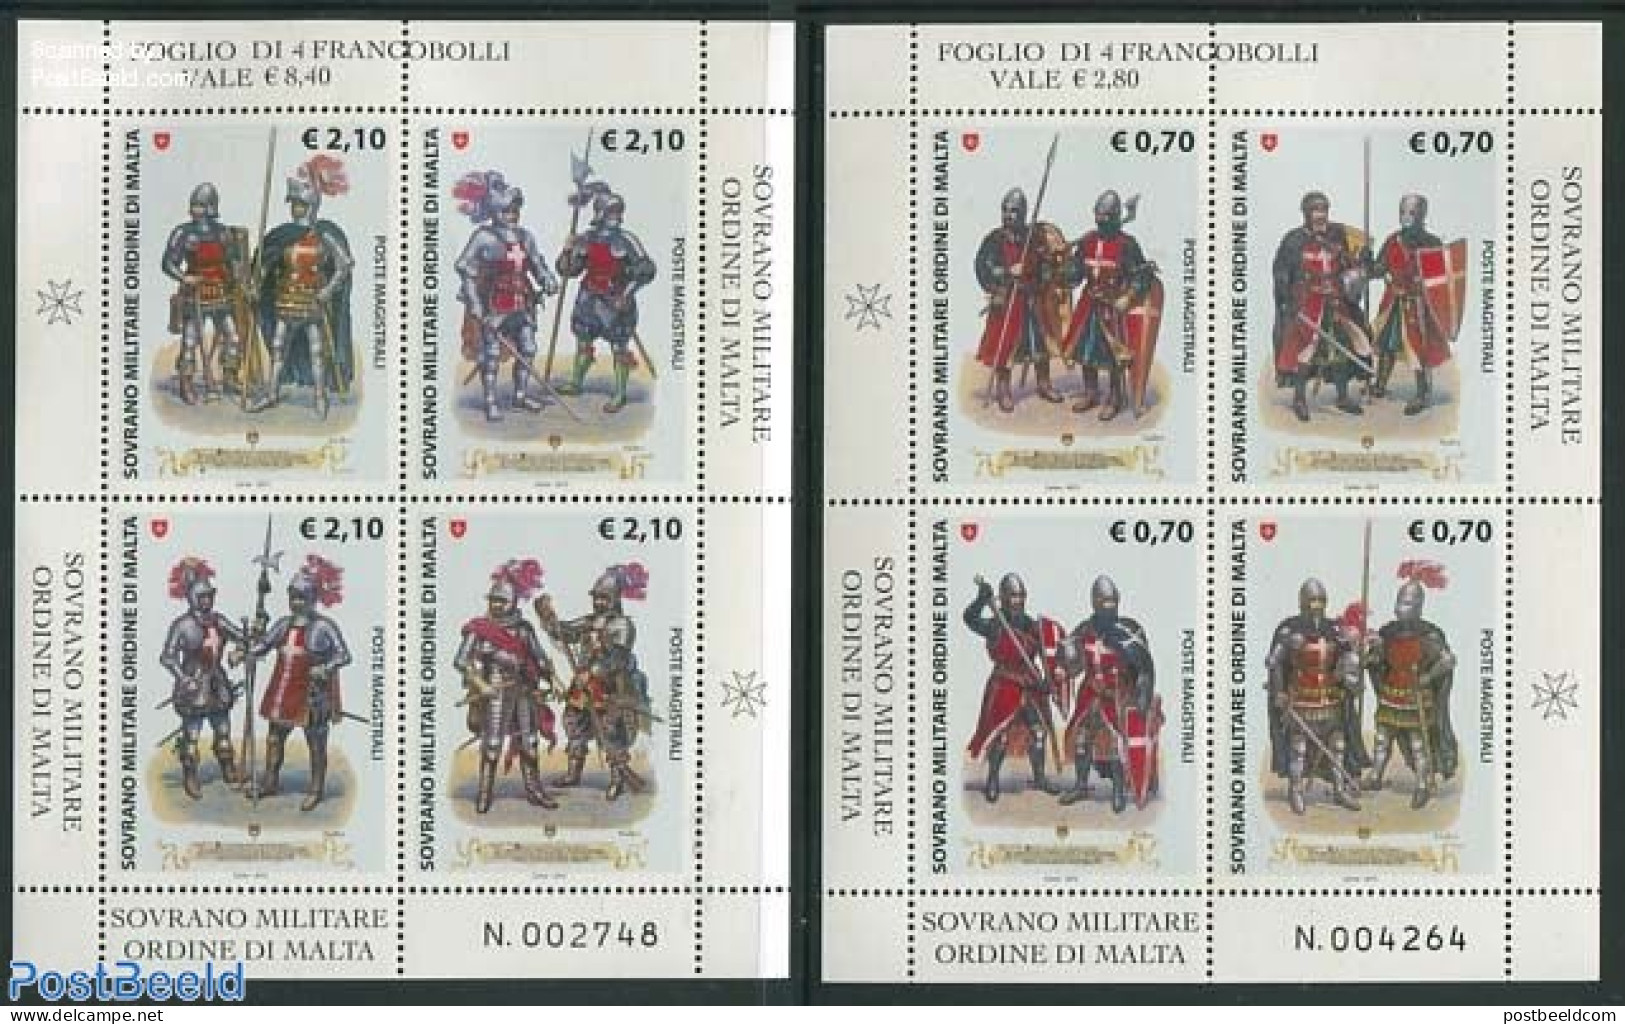 Sovereign Order Of Malta 2013 Uniforms 8v (2 M/s), Mint NH, History - Various - Knights - Uniforms - Costumes